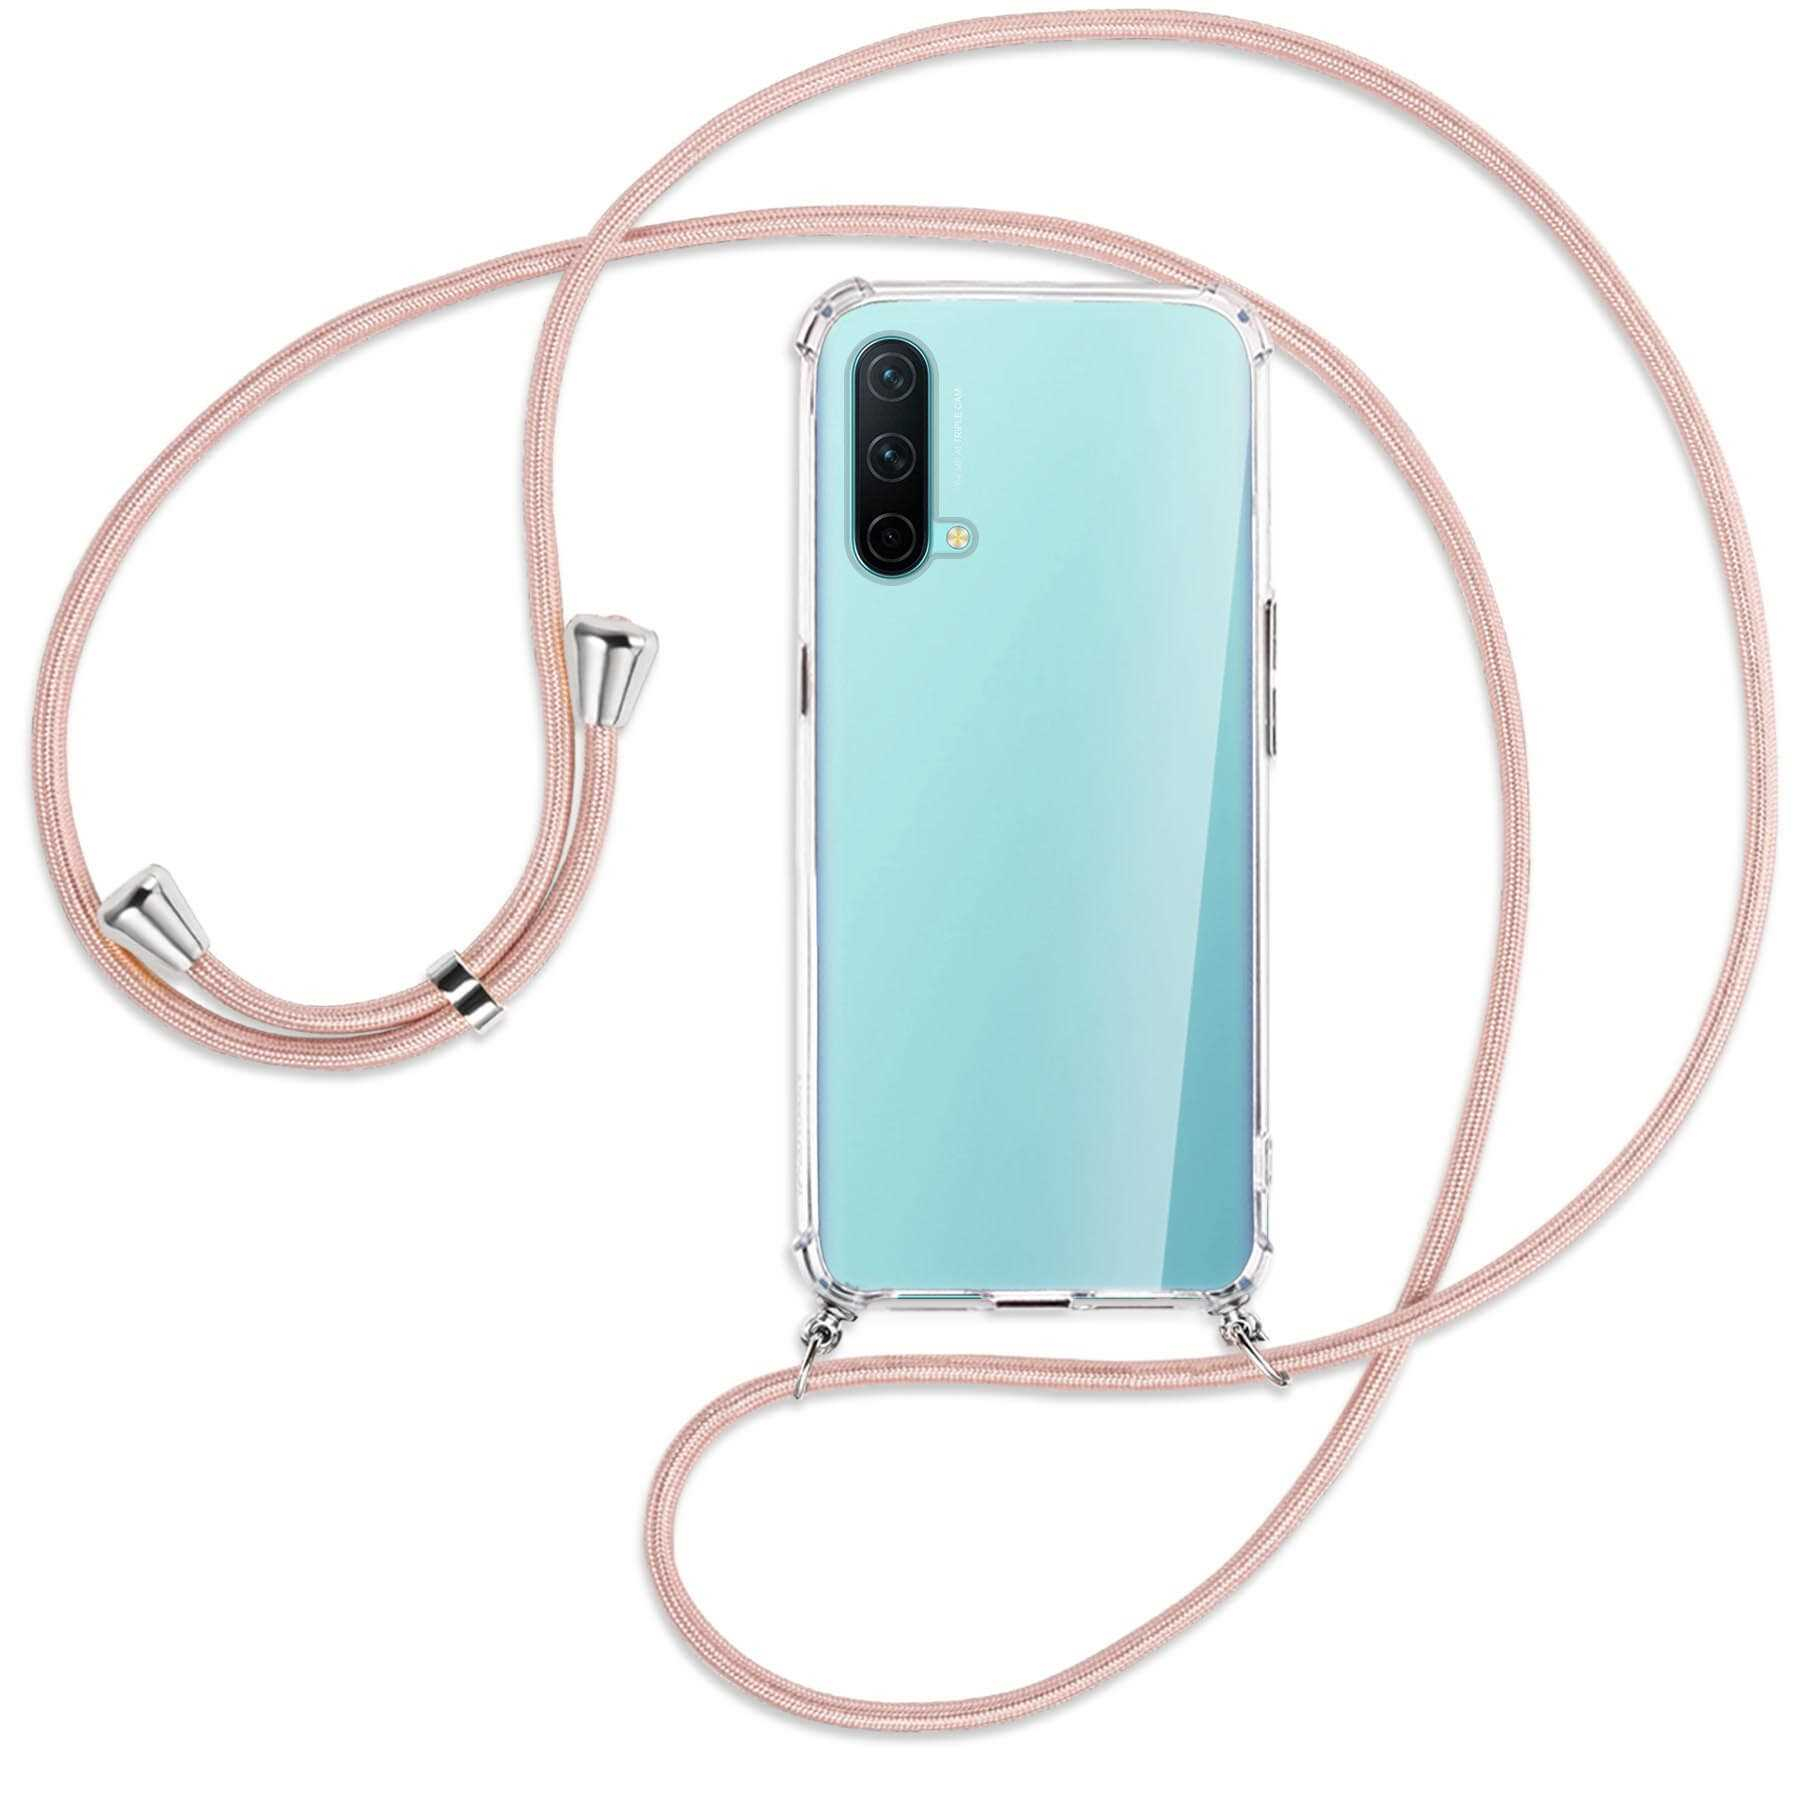 MTB MORE Nord mit Edition ENERGY / Silber Core Umhänge-Hülle CE OnePlus, 5G, Backcover, Kordel, Rosegold